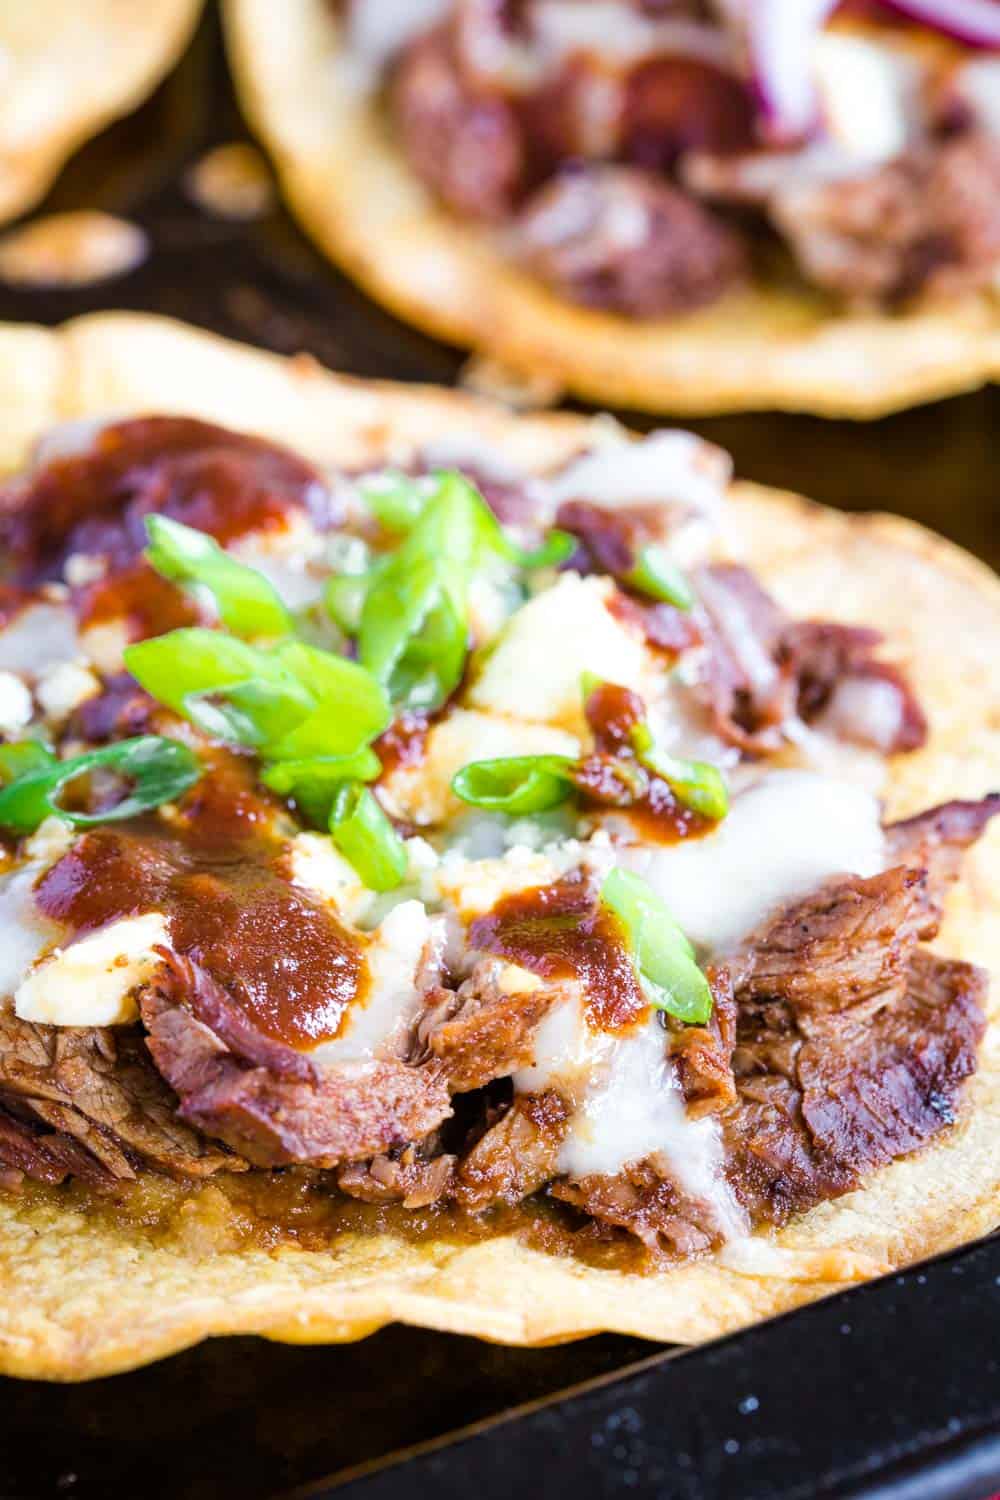 crispy corn tostada shell topped with slices of beef in steak sauce, melted monterey jack and blue cheese, topped with more steak sauce and sliced green onions